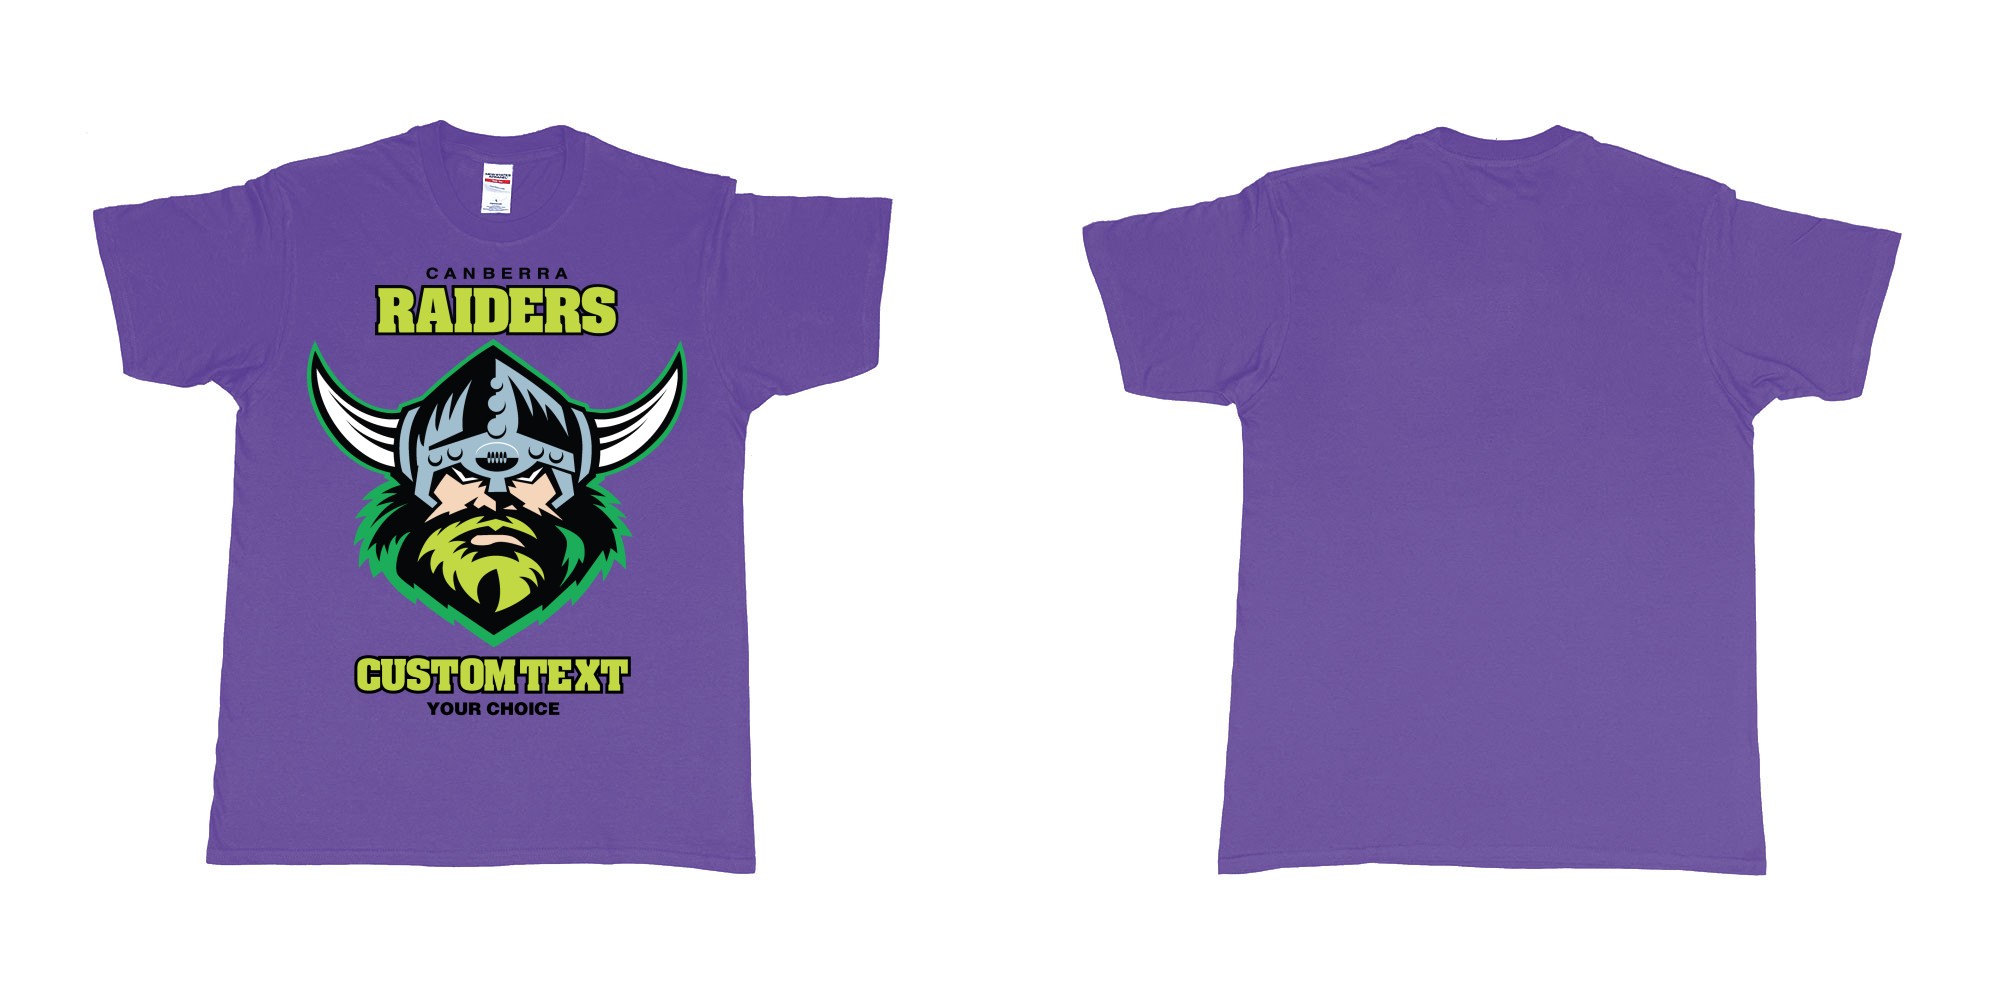 Custom tshirt design canberra raiders nrl logo own printed text near you in fabric color purple choice your own text made in Bali by The Pirate Way